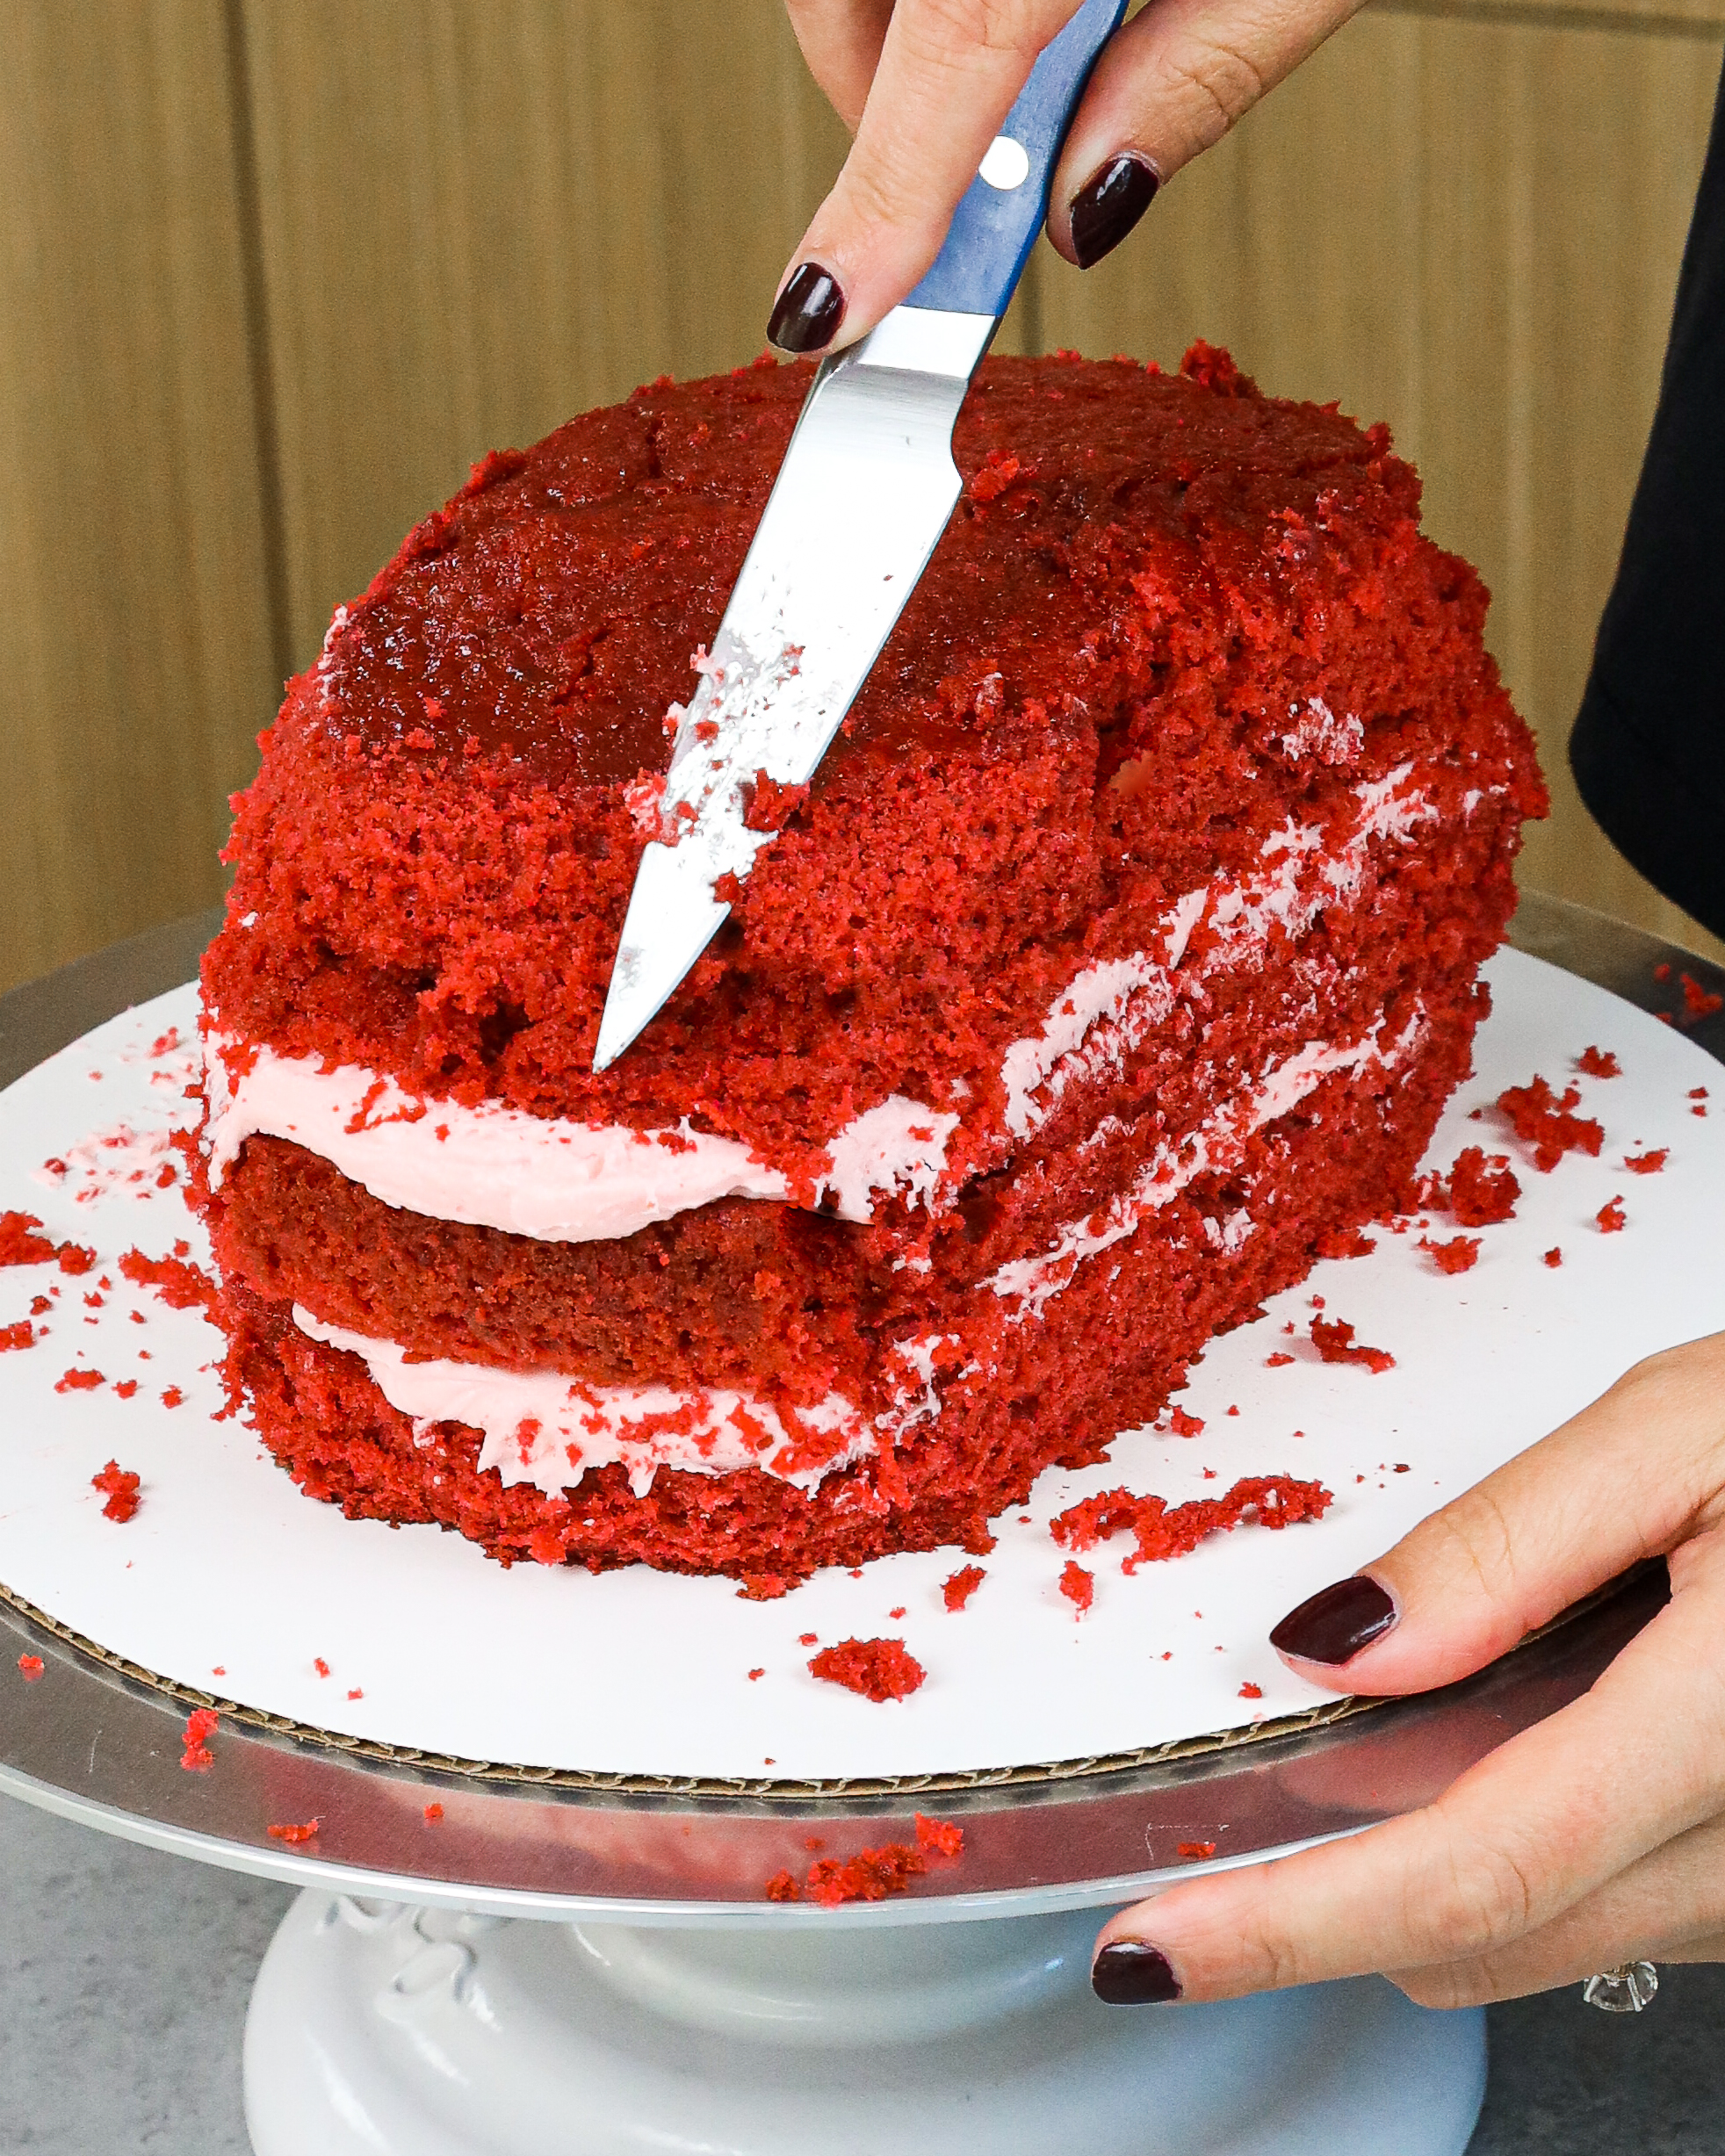 Image of edible fake blood made with raspberry jam scanned onto a brain-shaped cake for Halloween